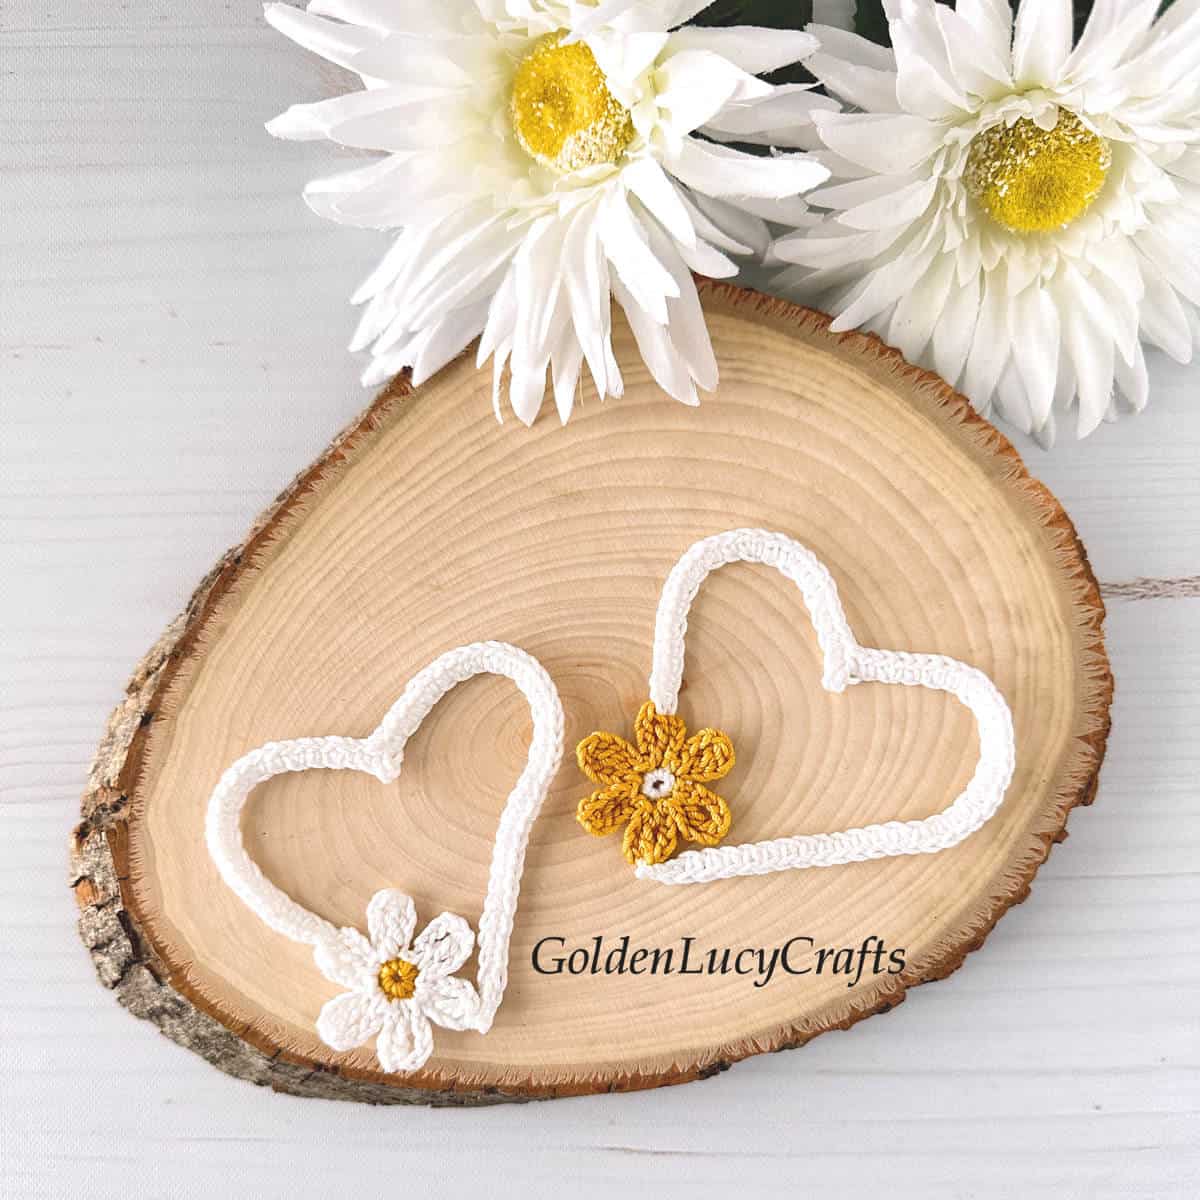 Two crochet white open hearts on wood slice, daisy flowers in the background.